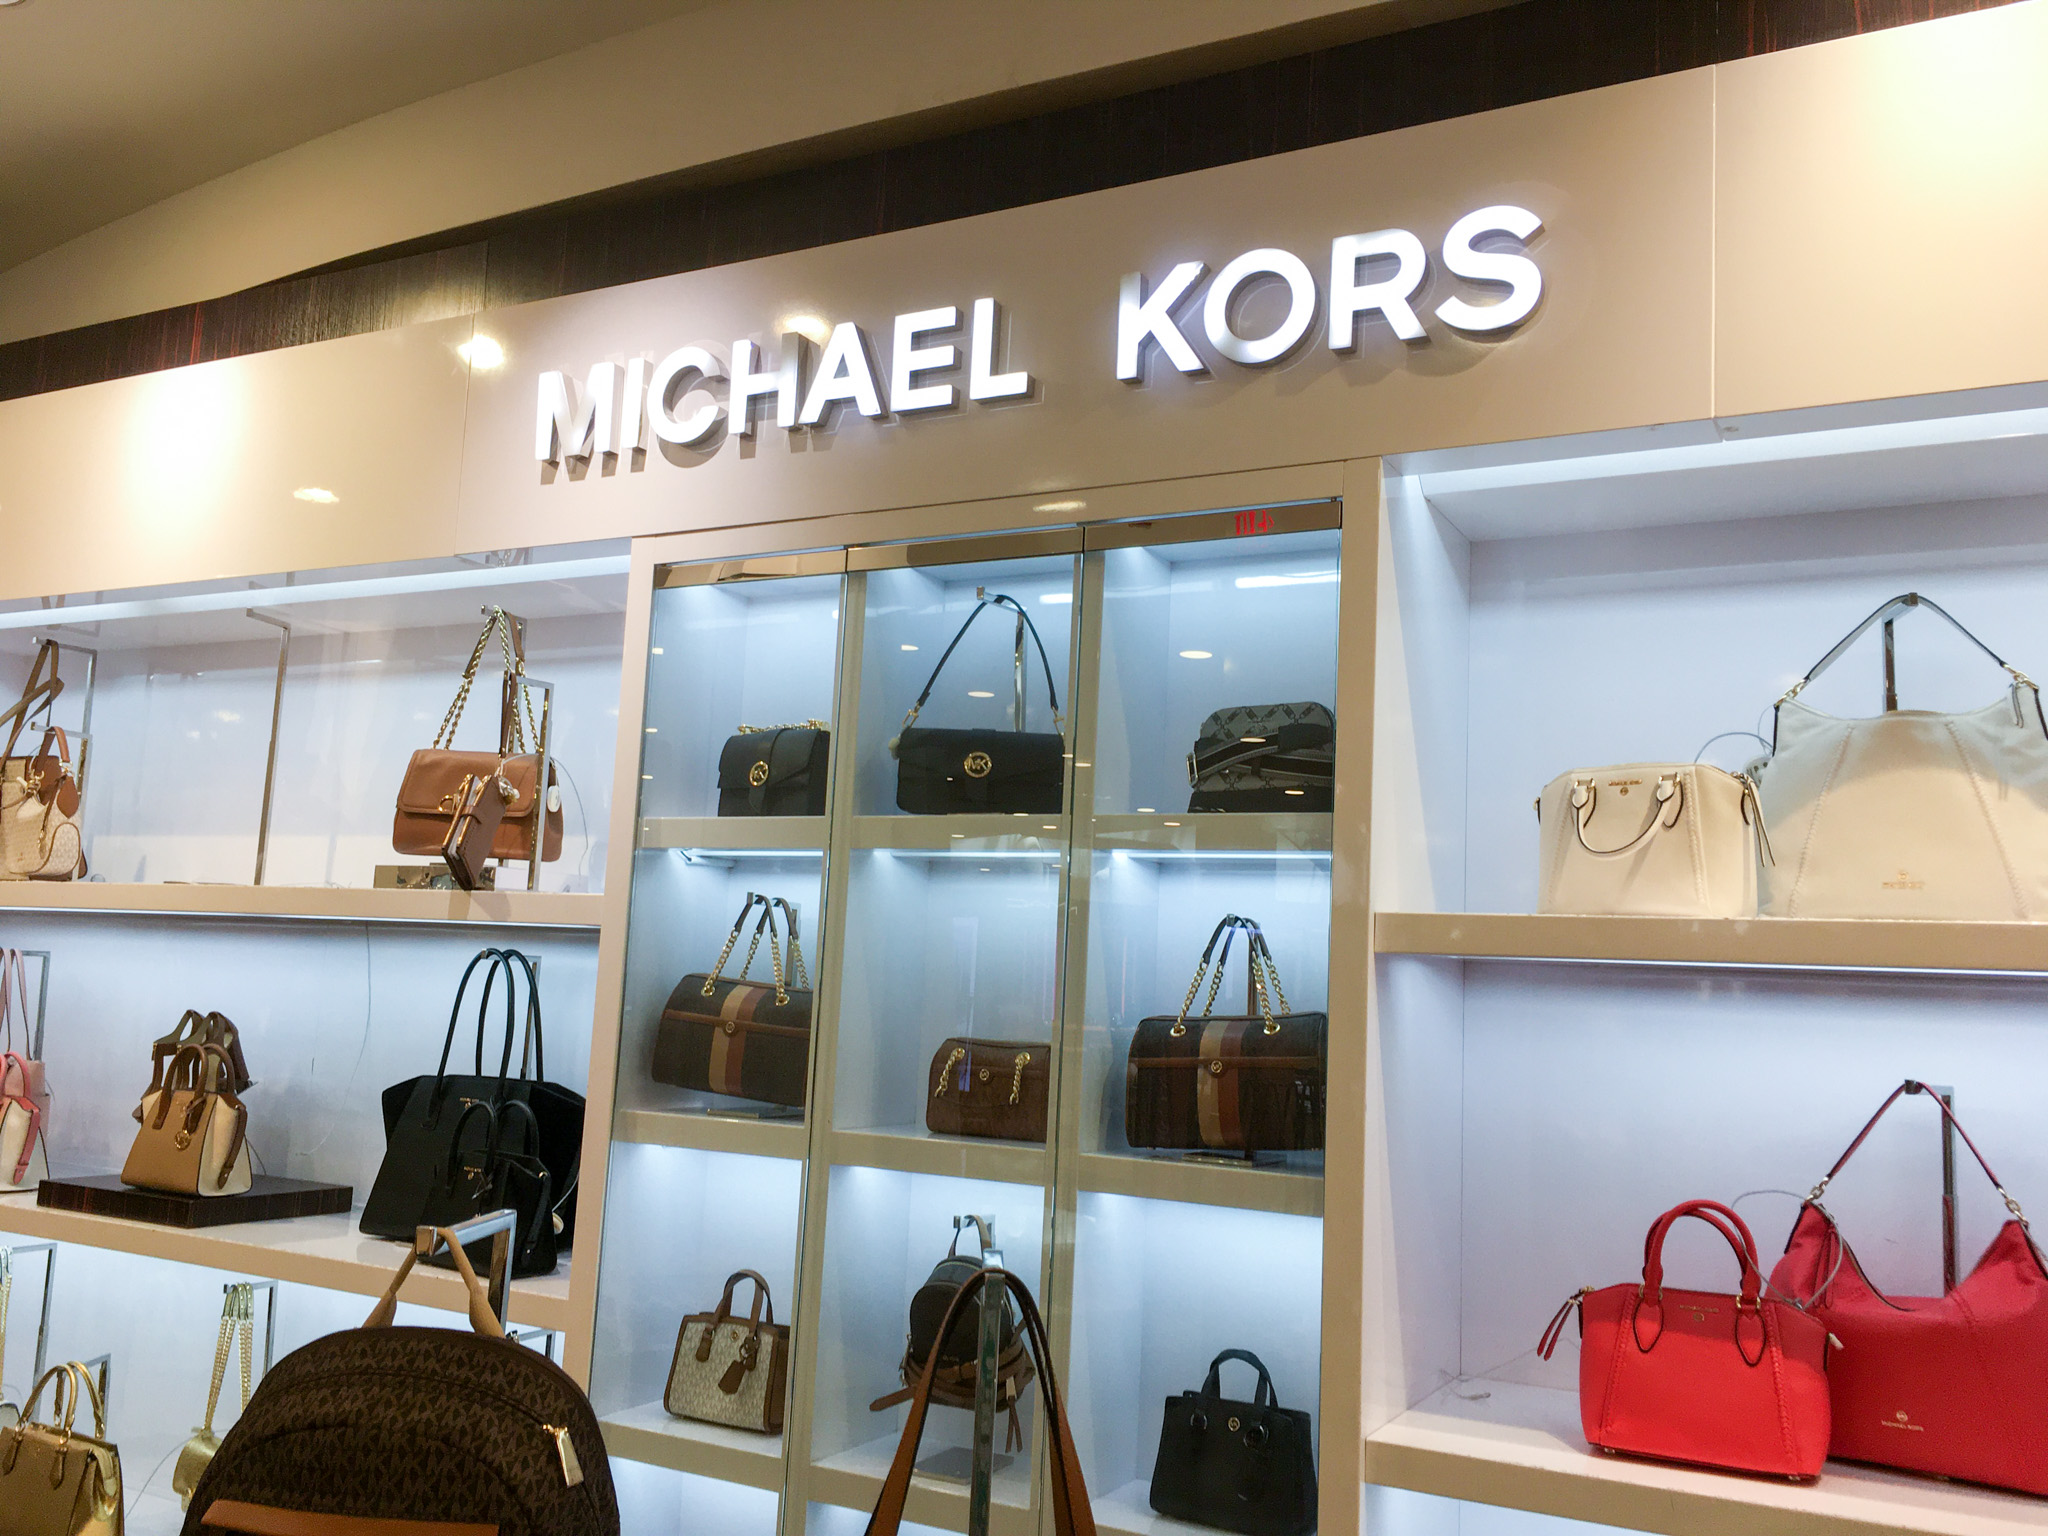 Entire Store Up To 70% Off - Michael Kors Outlet, OKC Outlets